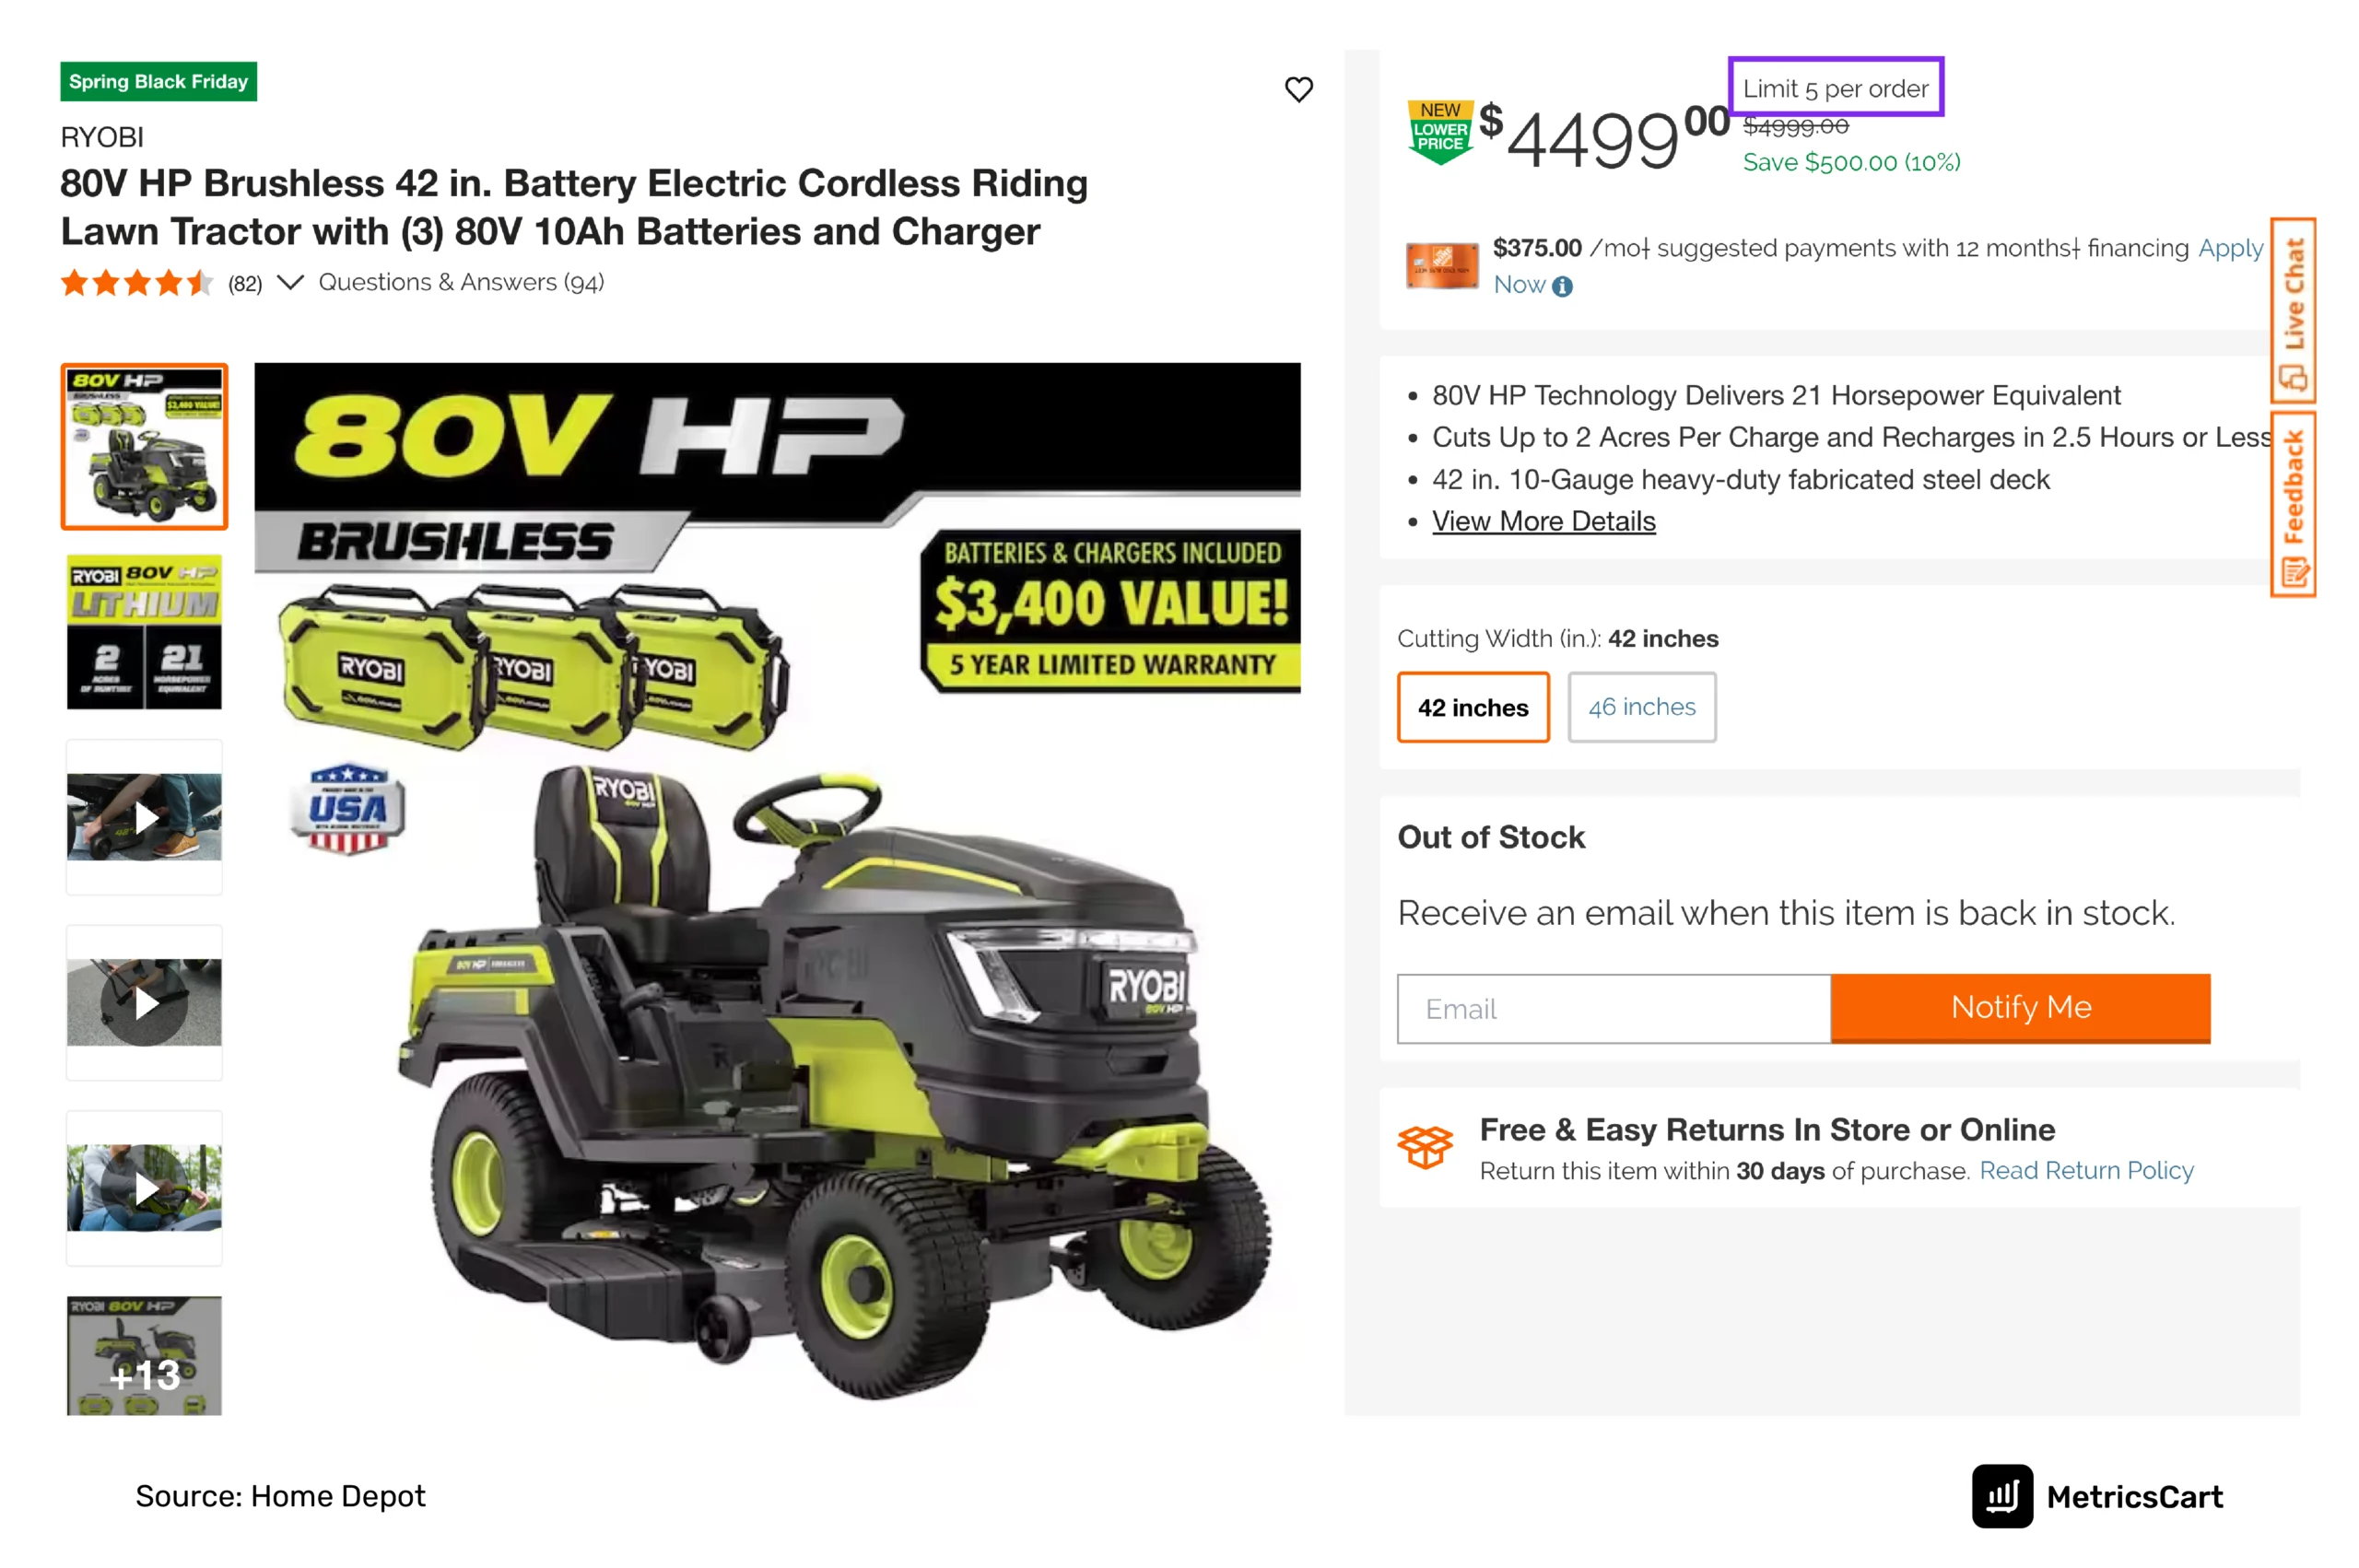 the image shows a bundled promotion pricing of an electric cordless lawn tractor with batteries and chargers for $4499